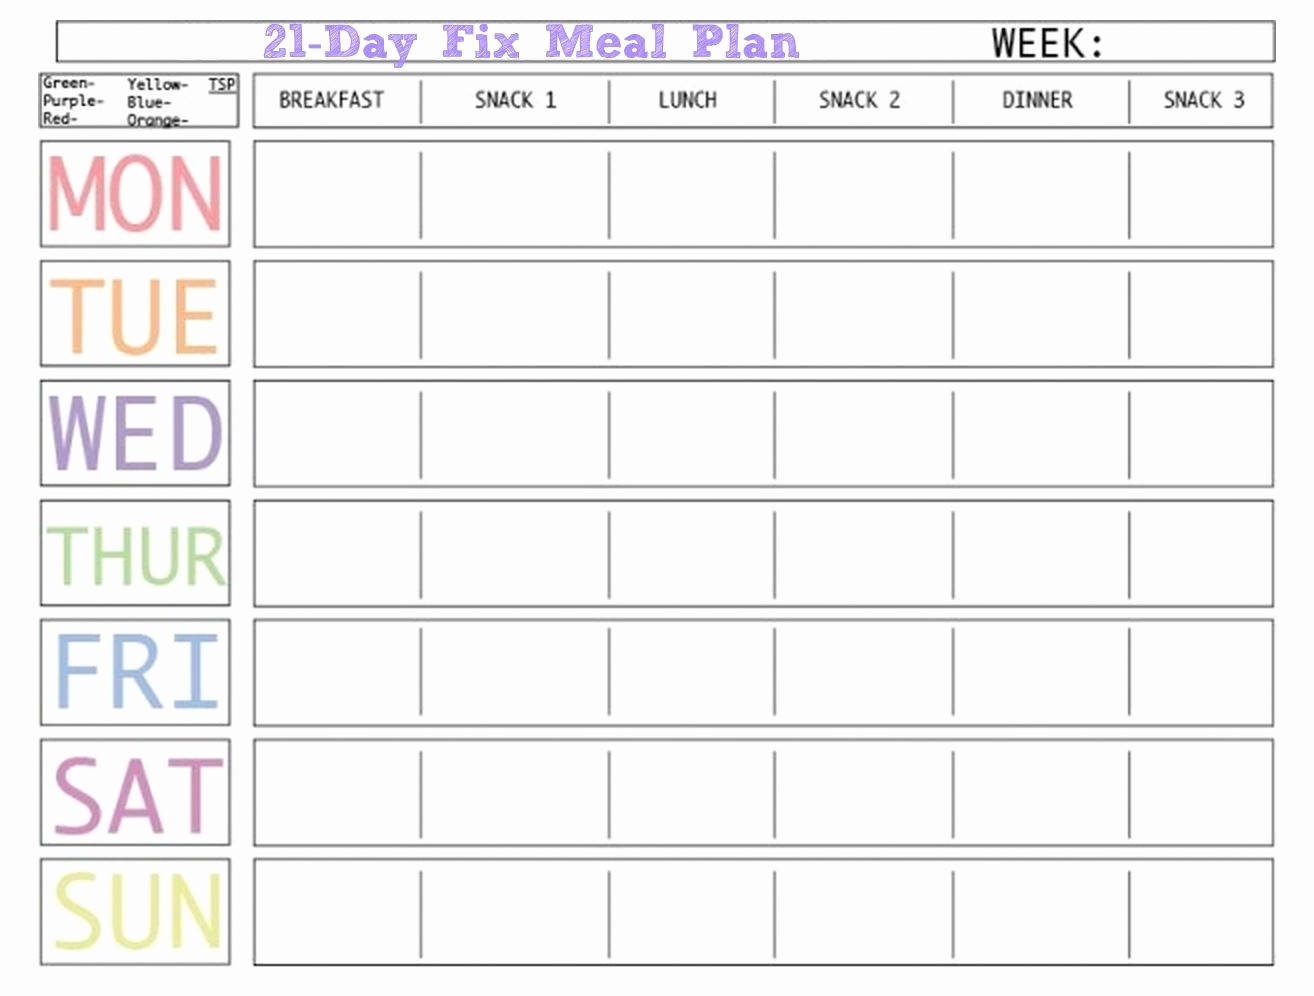 Weekly Meal Plan Template Free Awesome Here is A Blank Meal Plan Template You Can Use Diet Plan